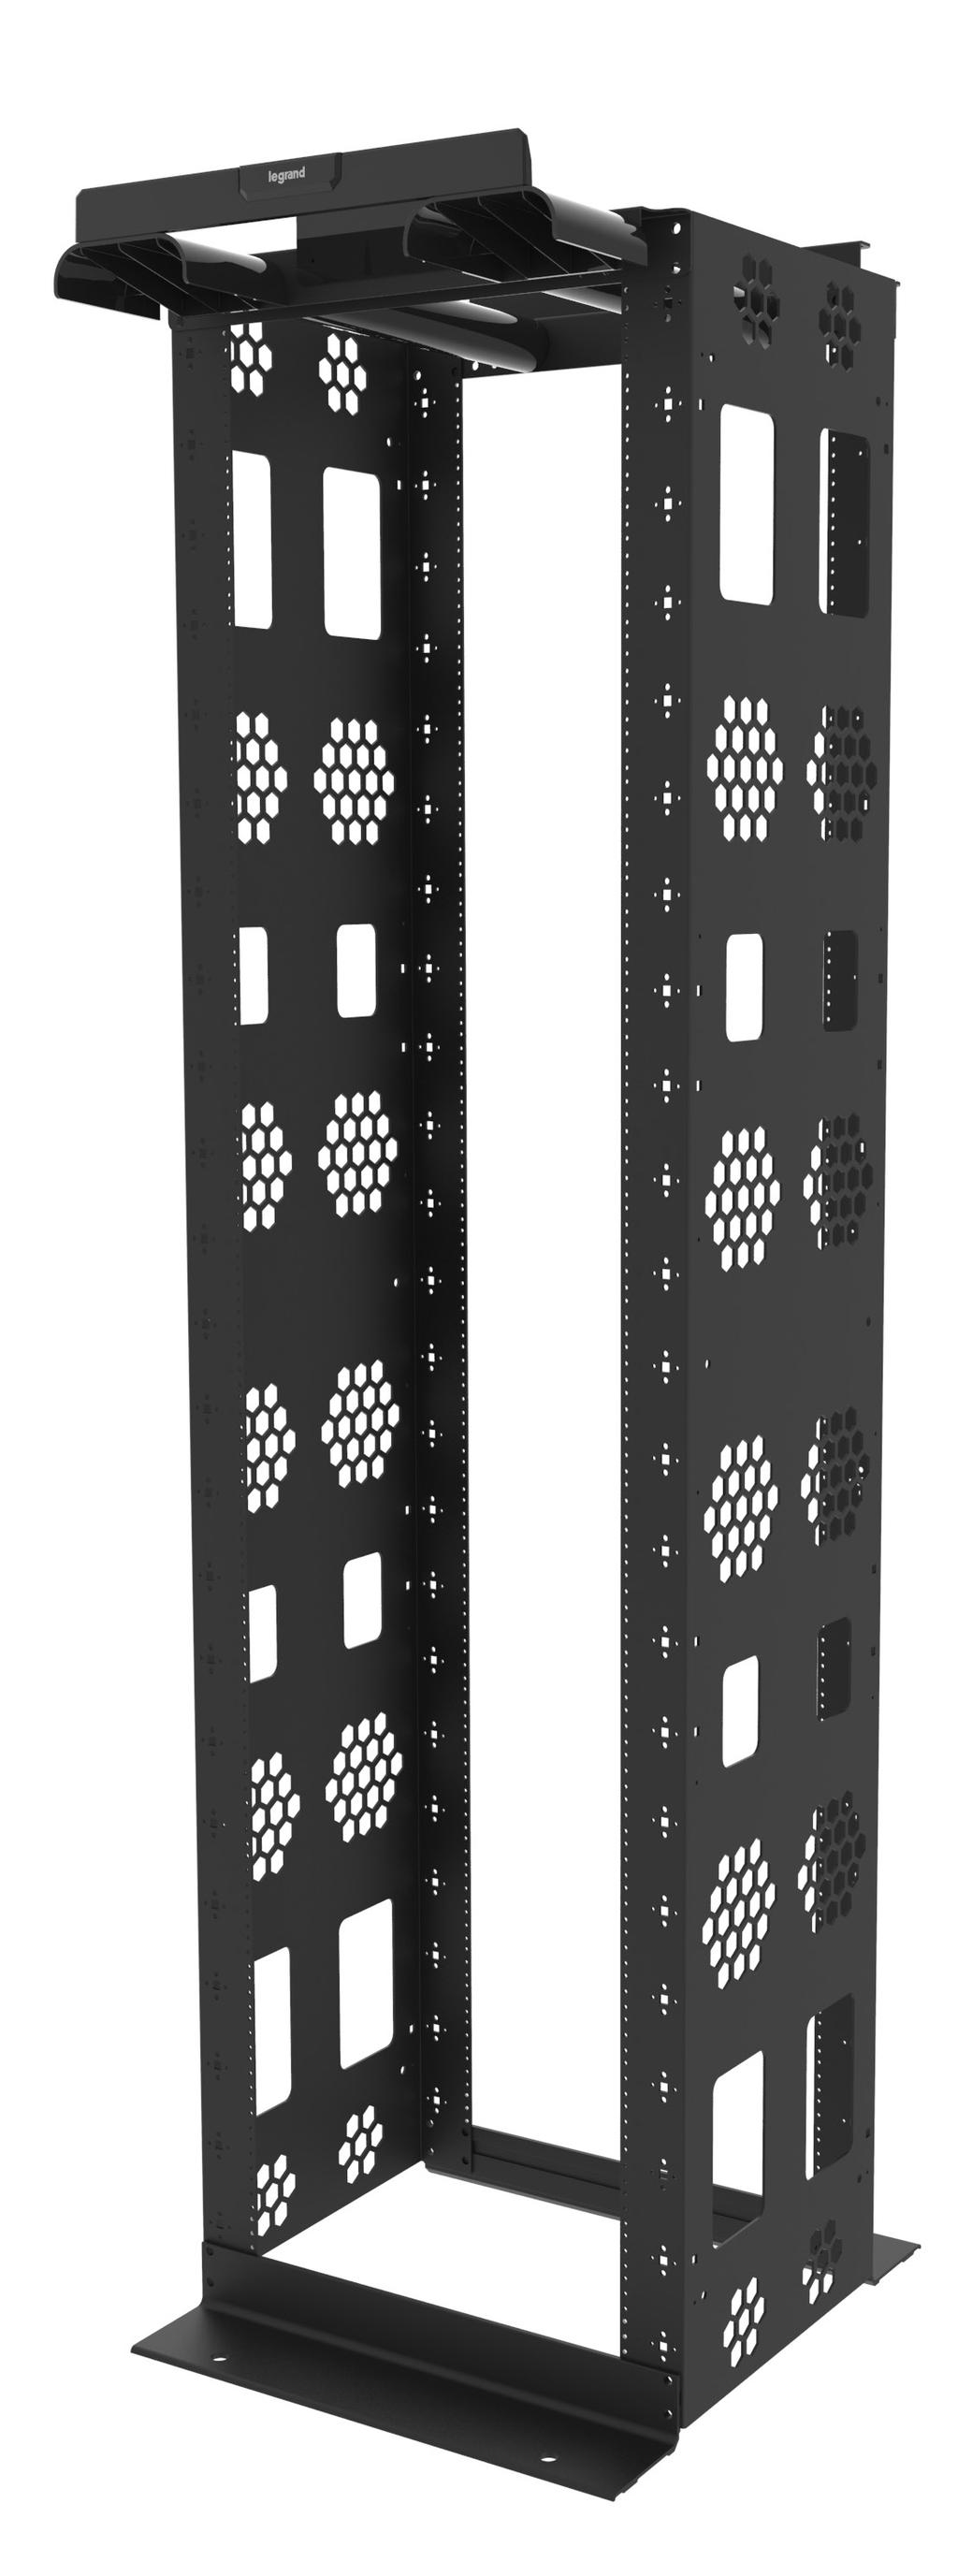 BENEFITS: Cost effective Perfect for building network applications when combined with the Q-Series Vertical Manager Simple assembly, aided by the following; Speed